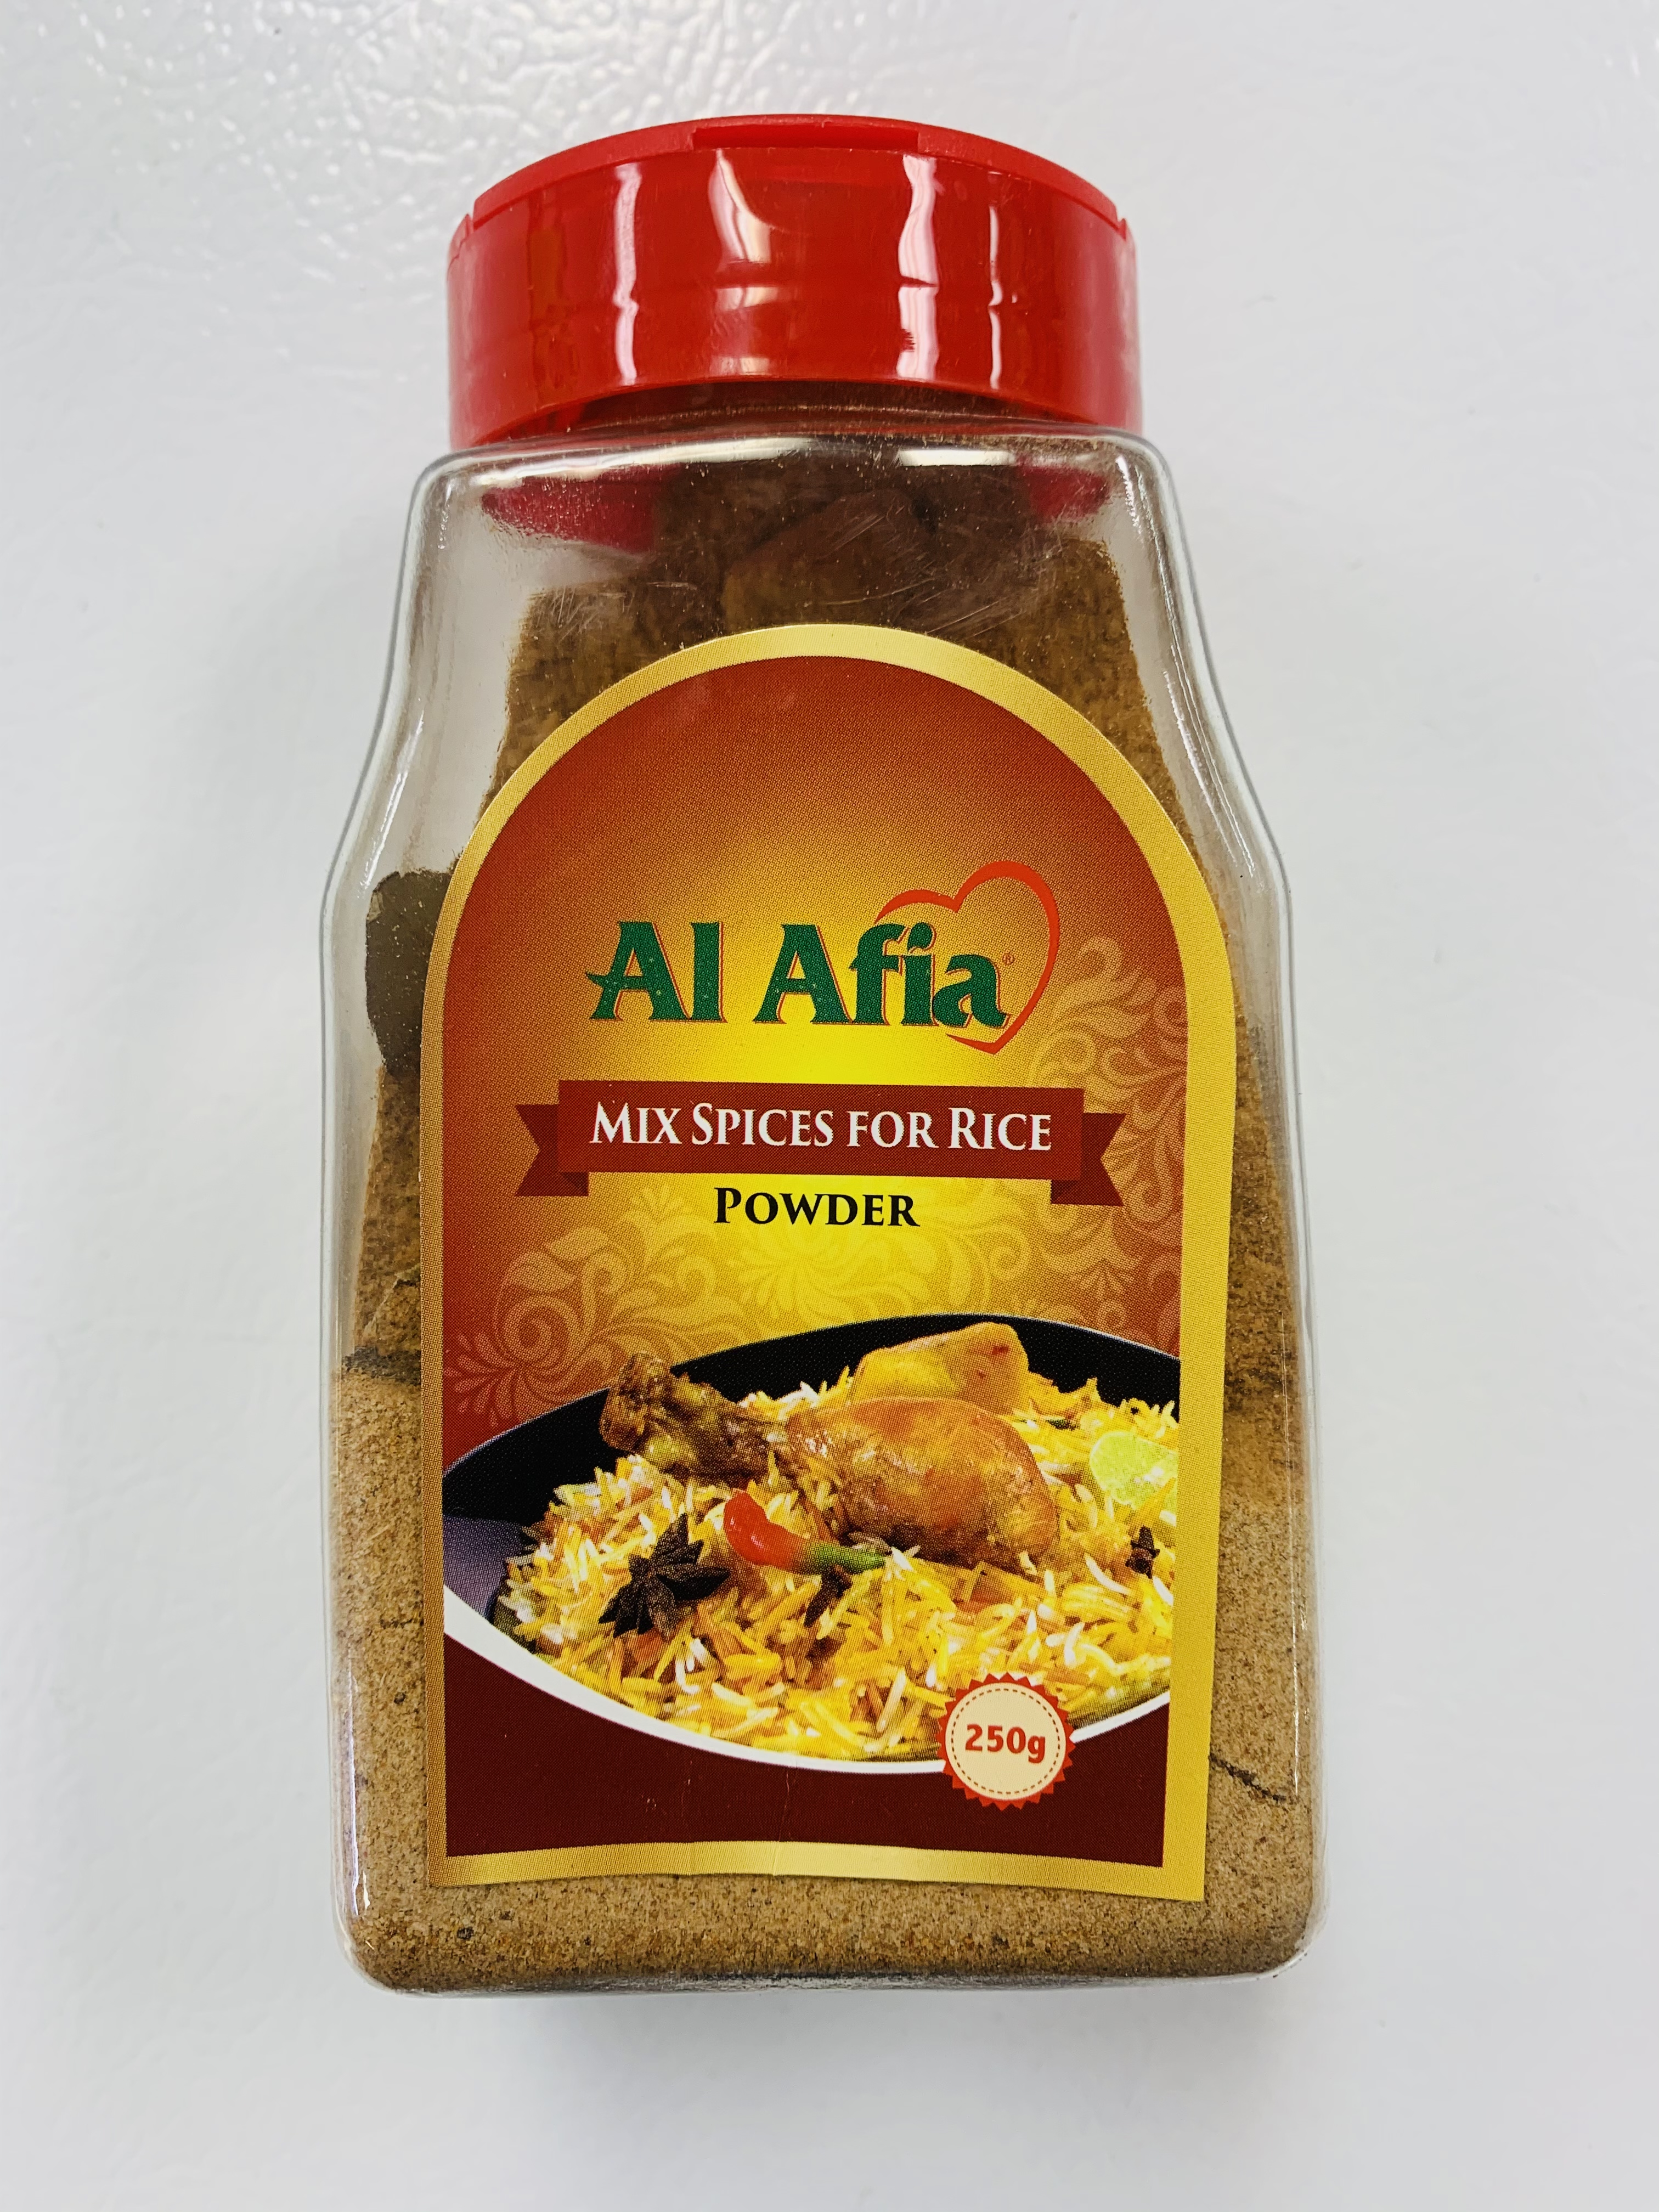 MIX SPICES FOR RICE (powder) <br>$4.99